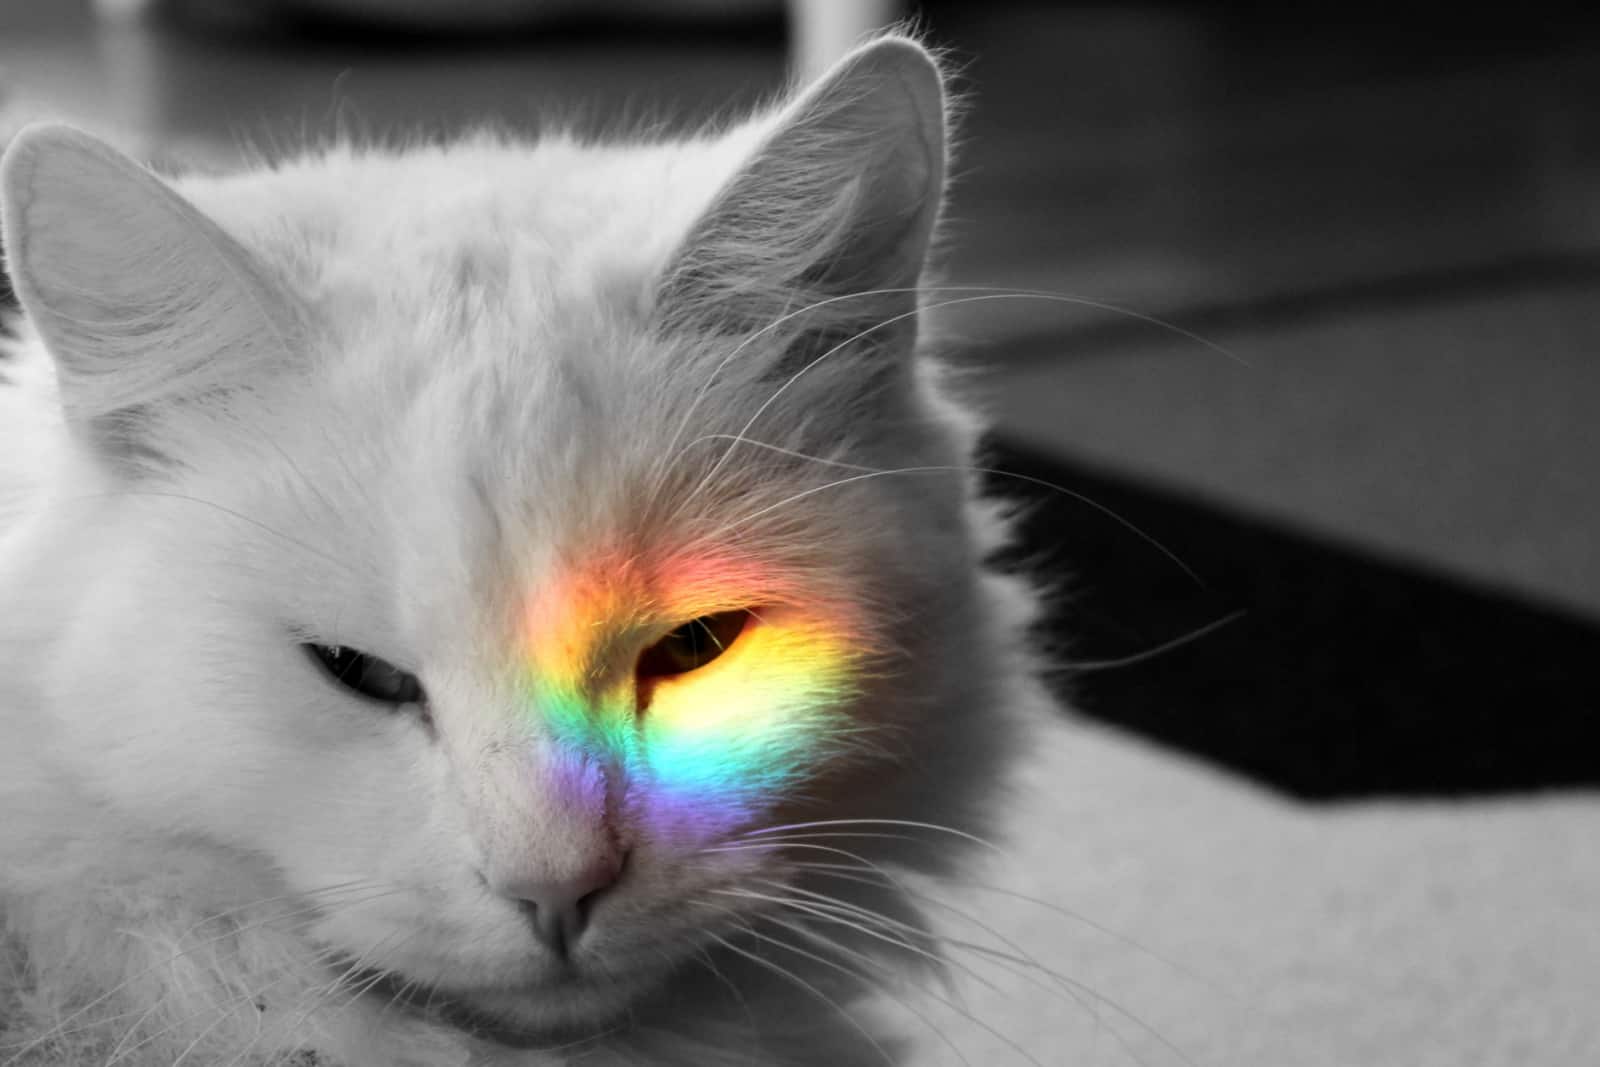 Black and white photo of a white cat with a rainbow over his eye.